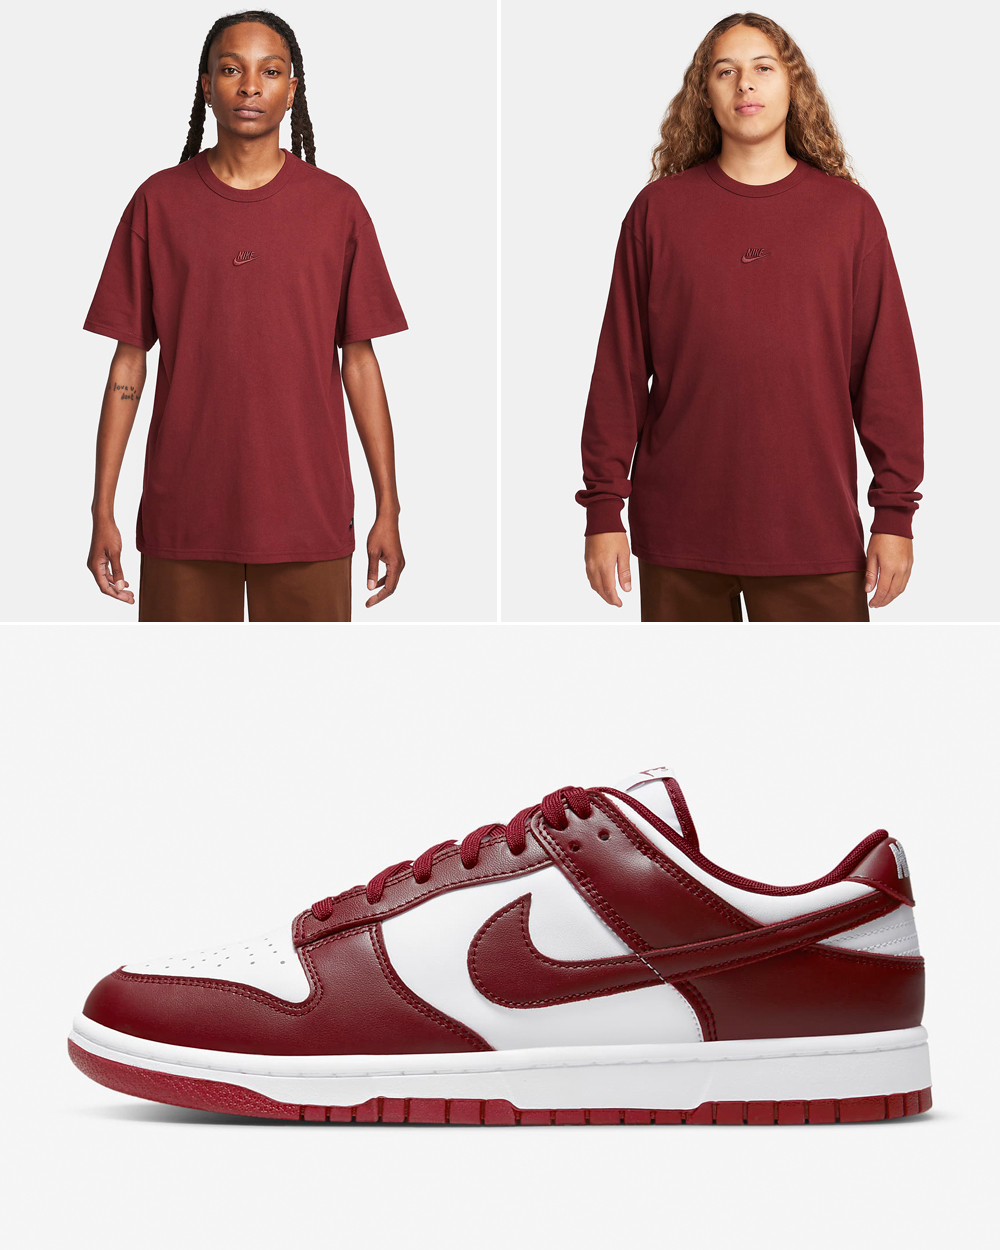 Nike-Dunk-Low-Team-Red-Shirts